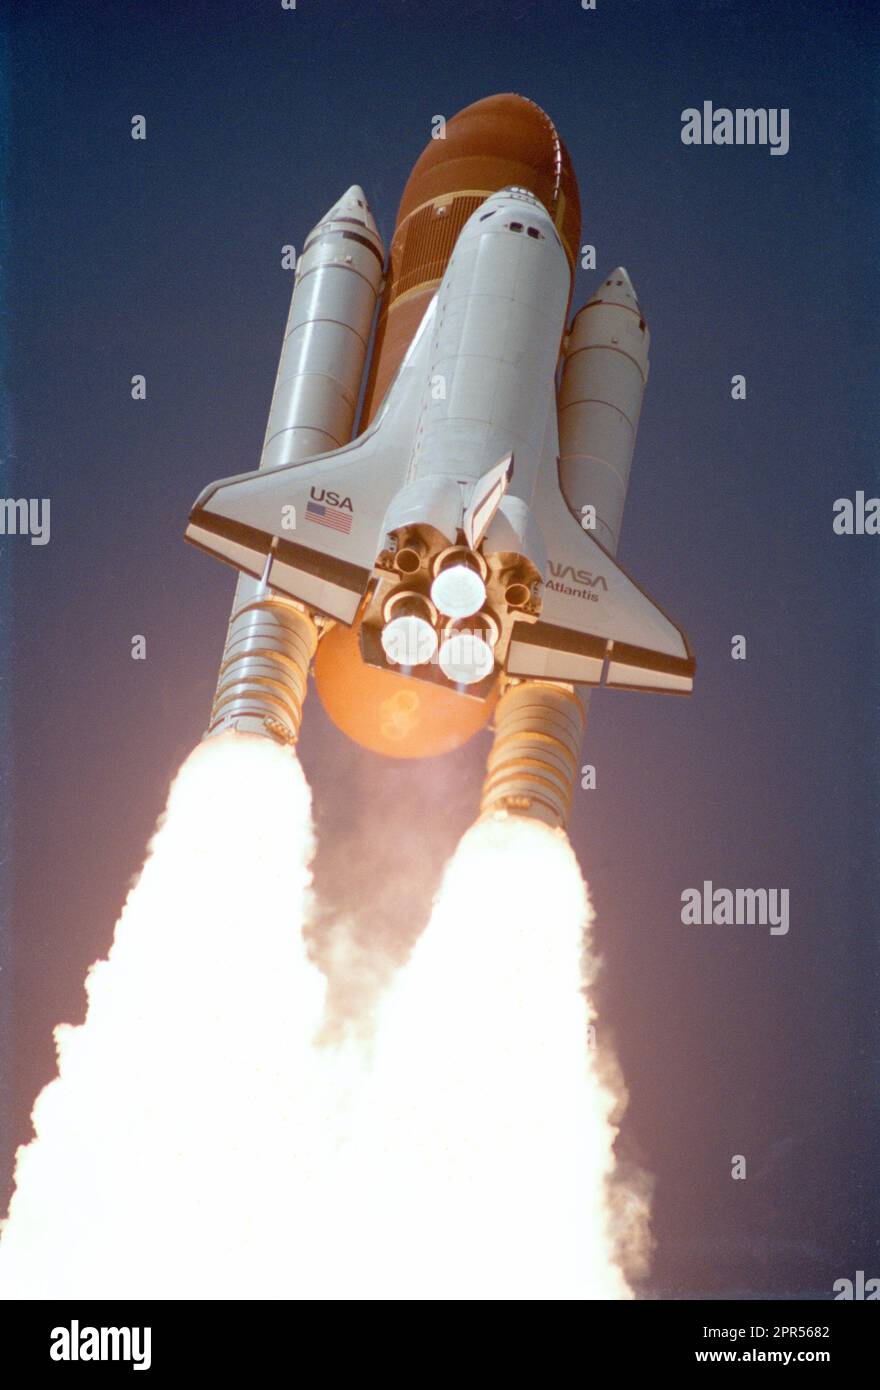 Liftoff of first flight of Atlantis and the STS 51-J mission. The view is from the below the orbiter and show its solid rocket boosters firing. Stock Photo